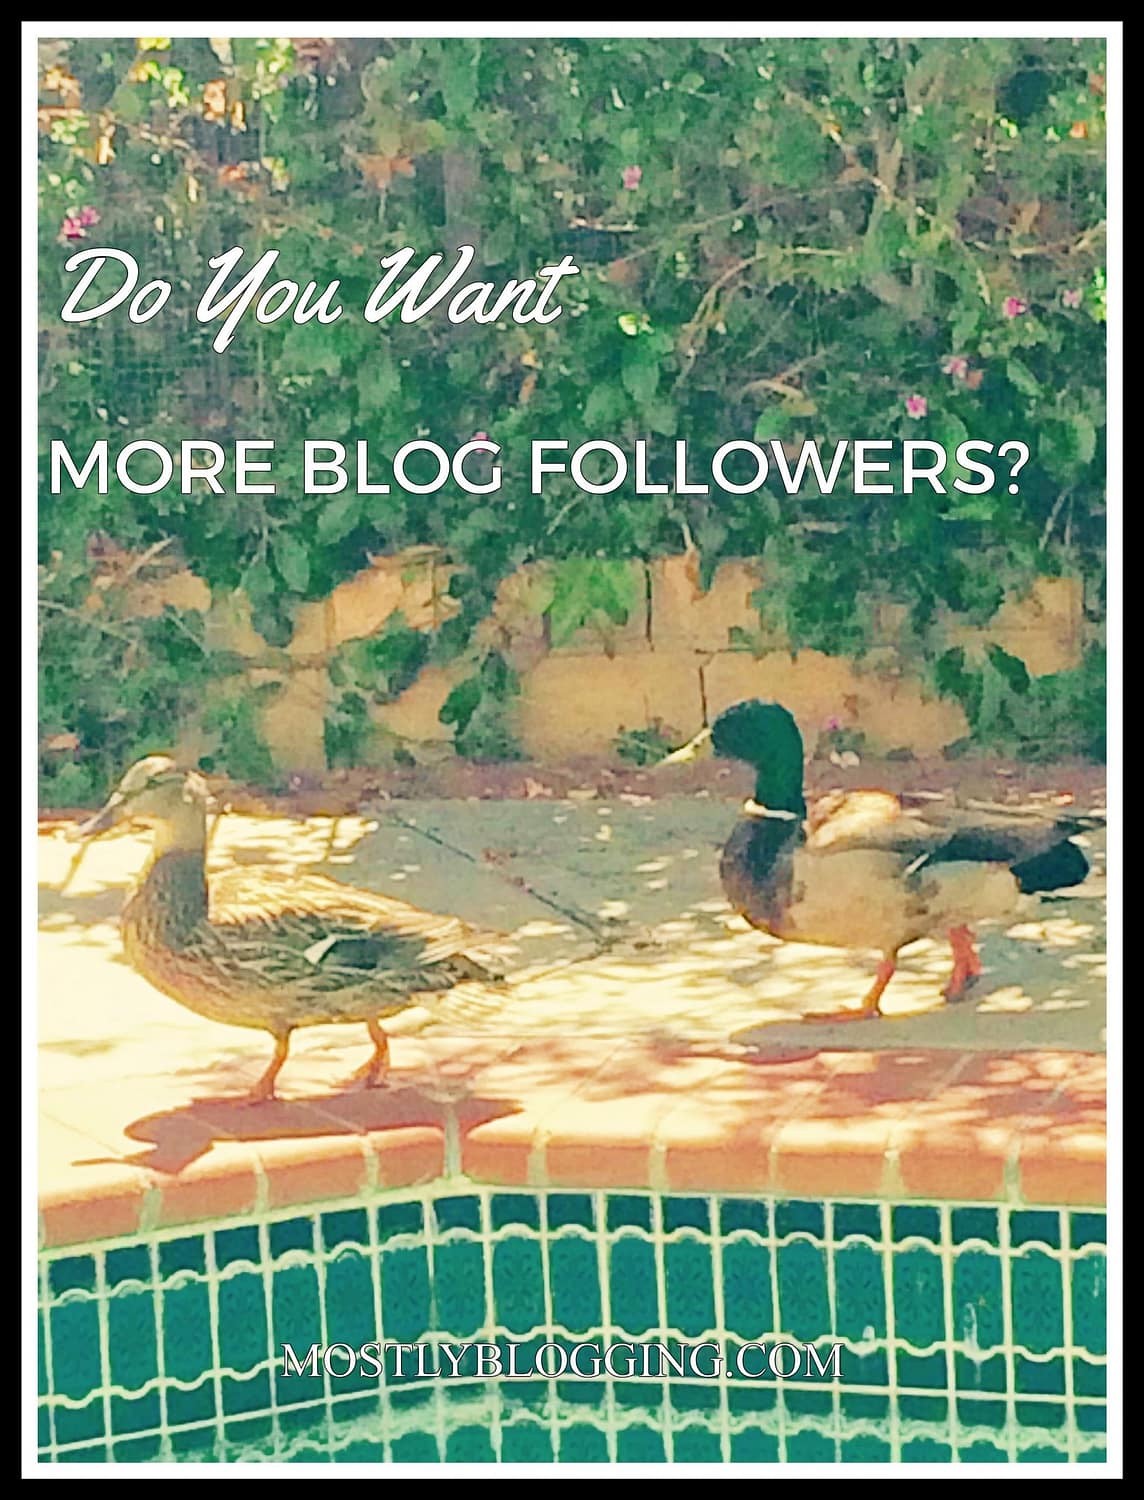 Bloggers can get more blog followers